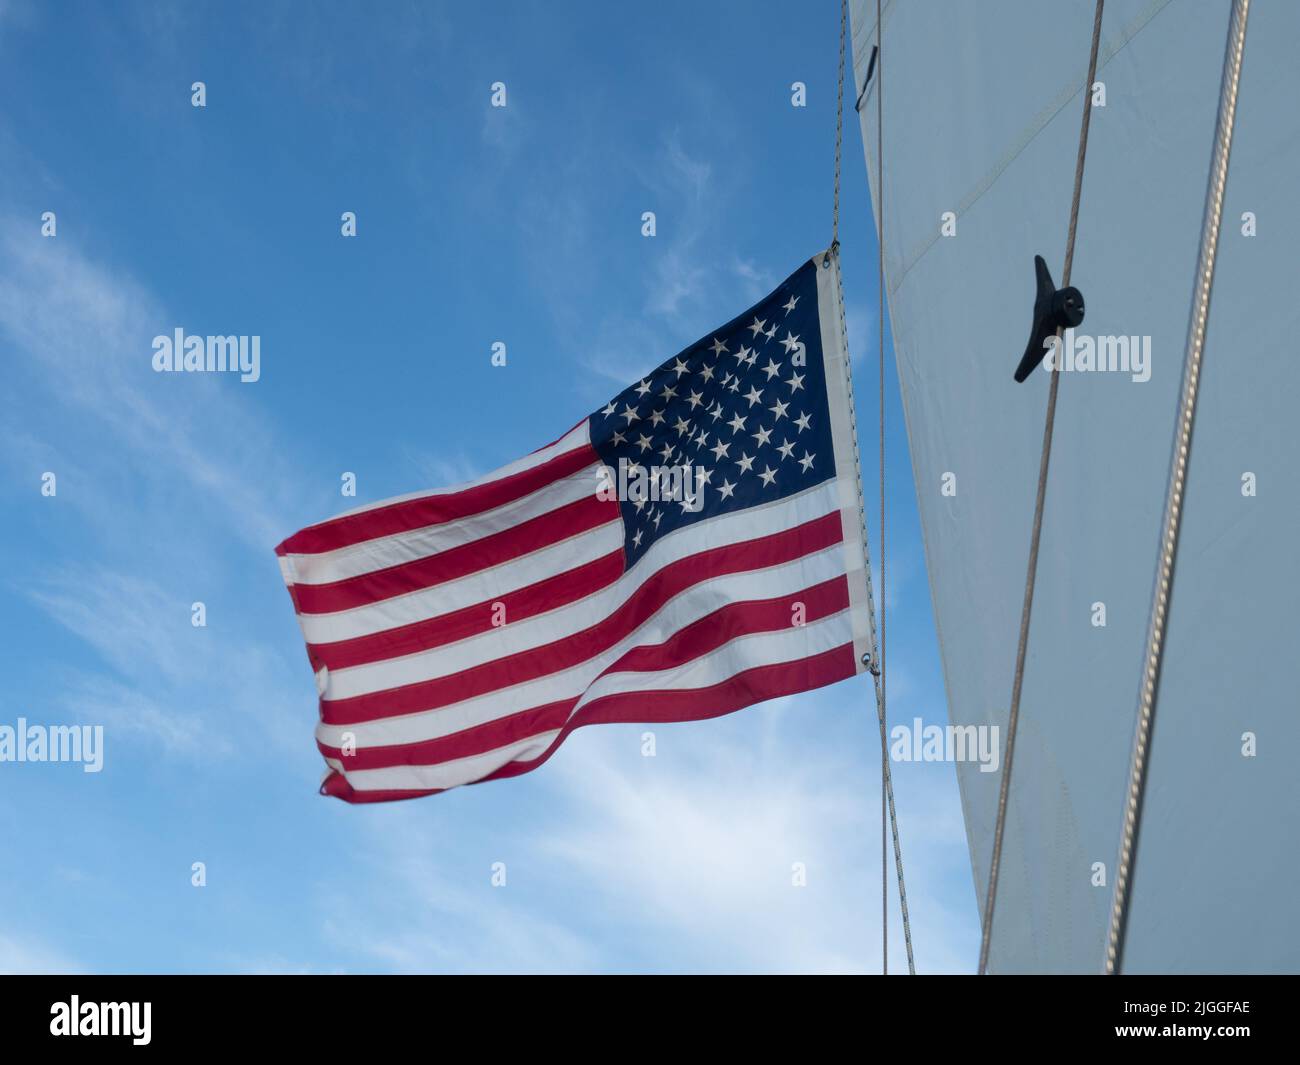 An unfurled American flag flying from a mast or sailboat rig with blue sky and thin clouds in background. Stock Photo